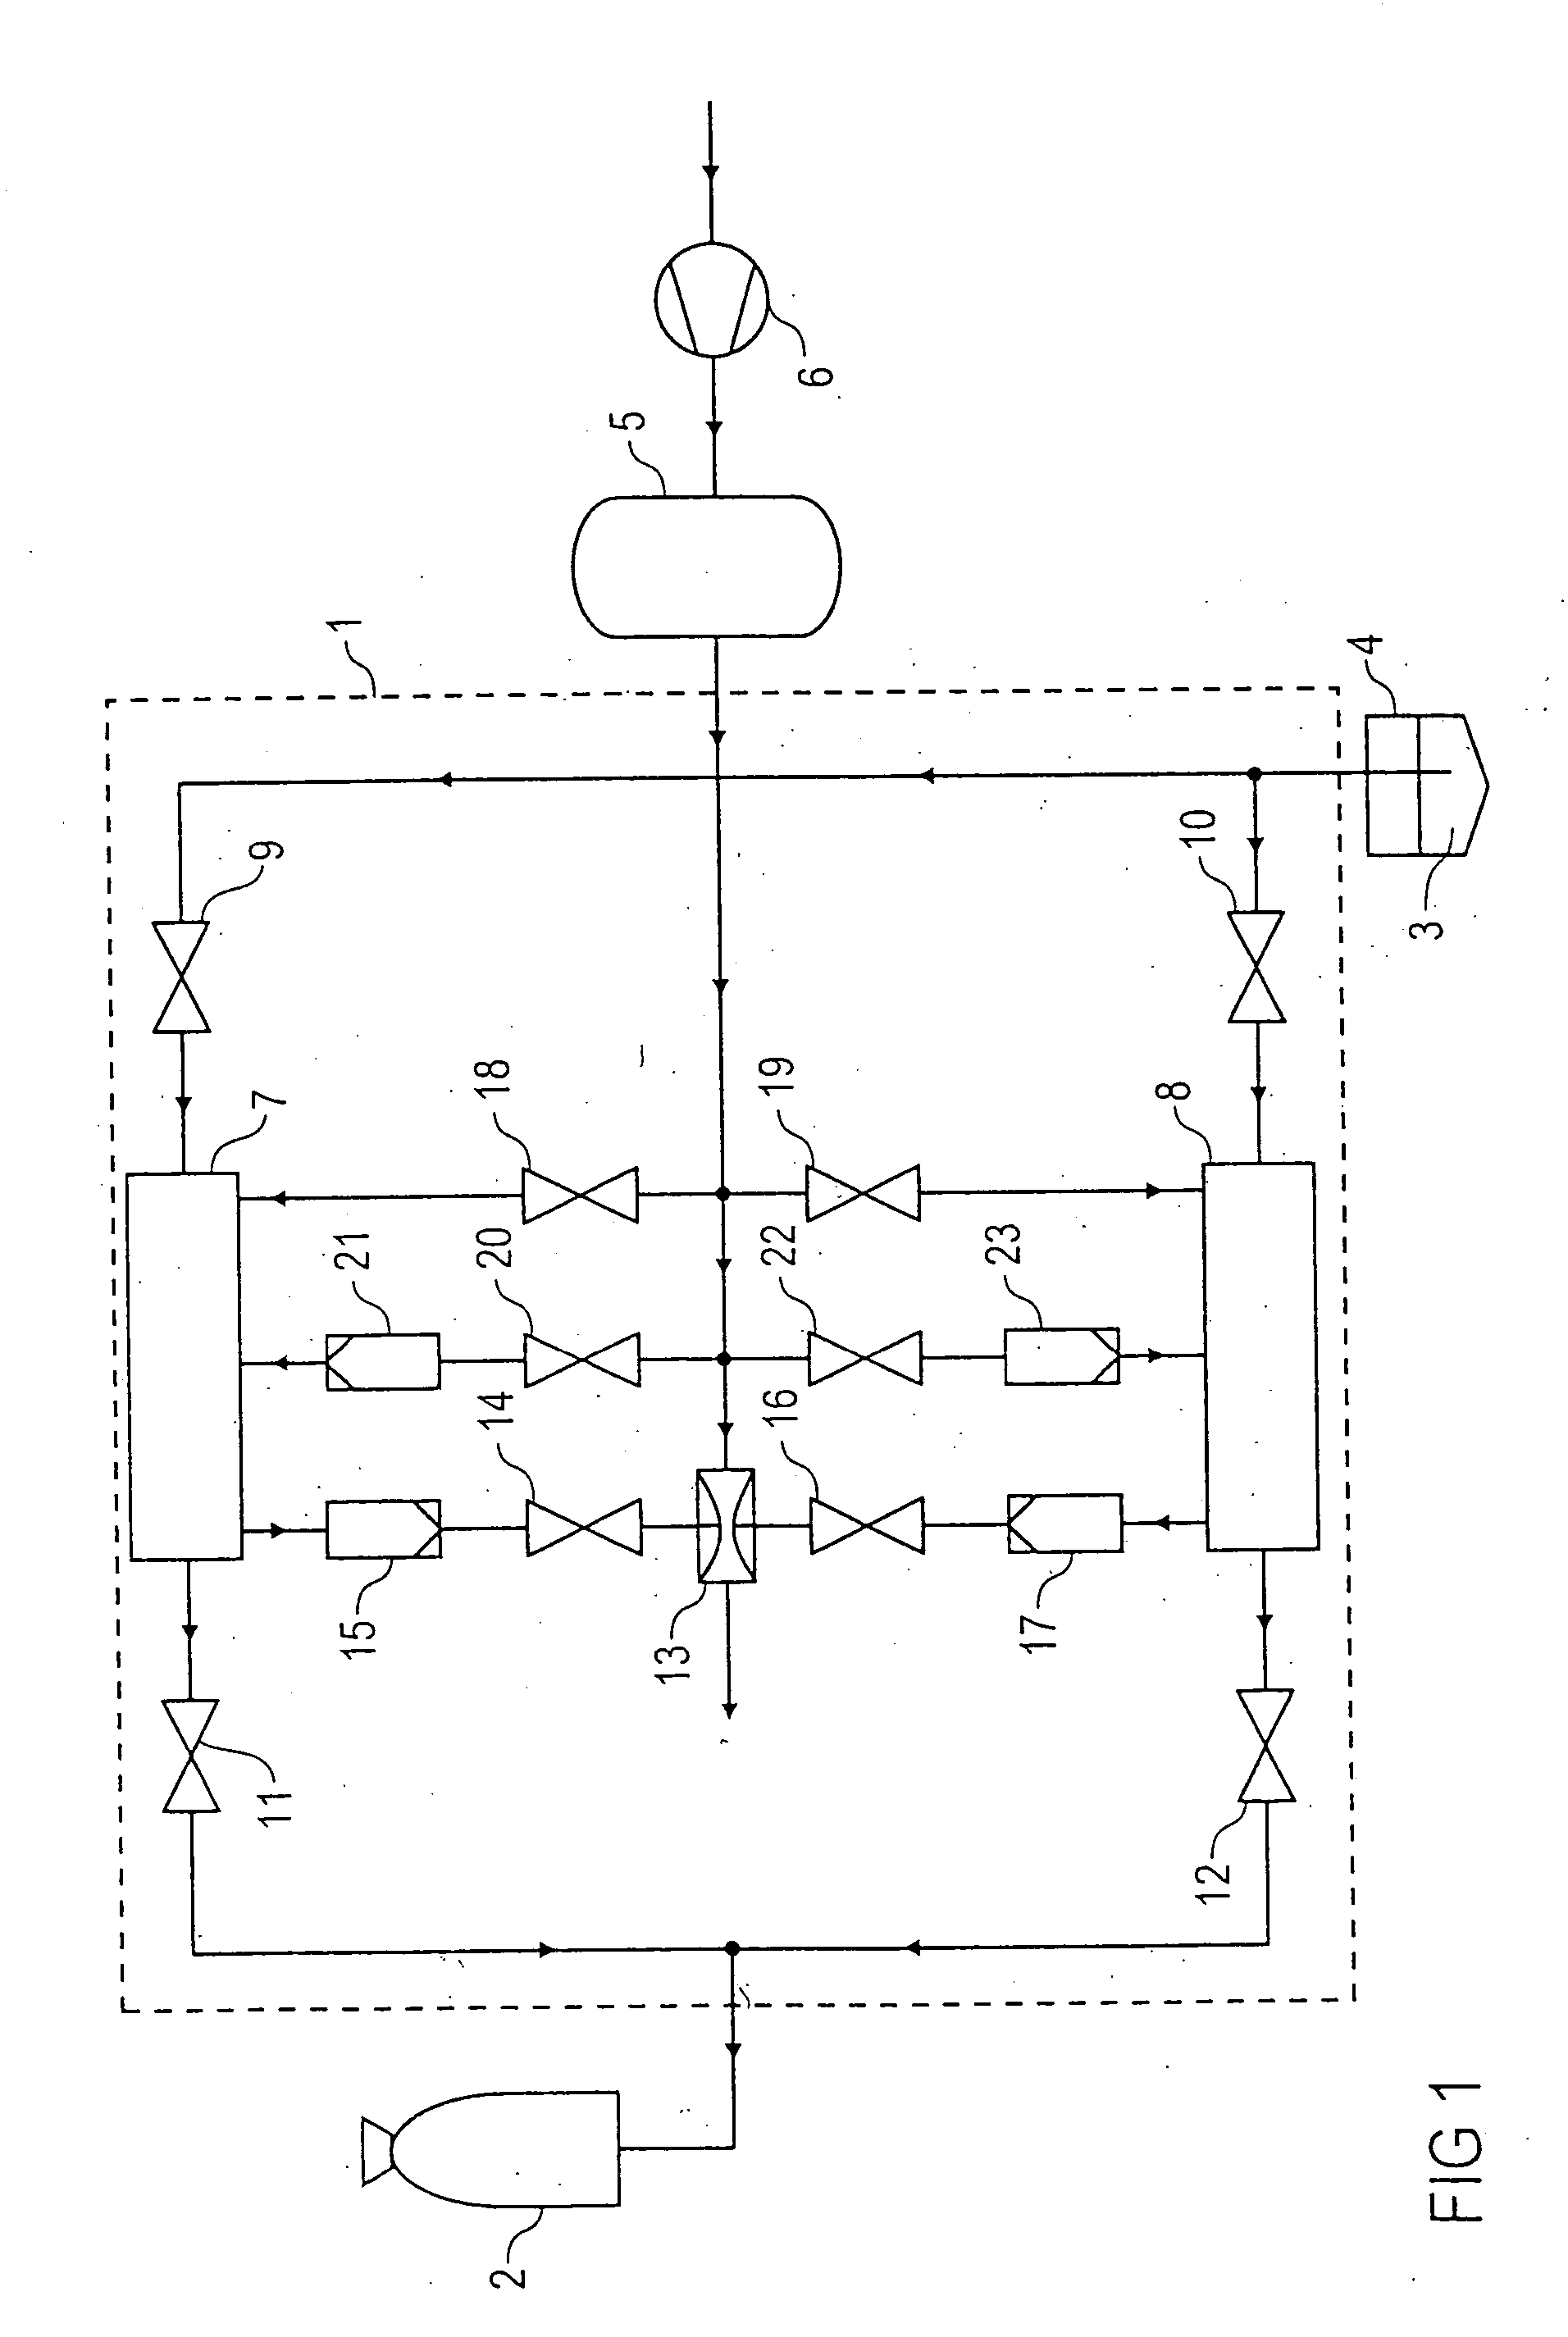 Powder feed pump and appropriate operating system